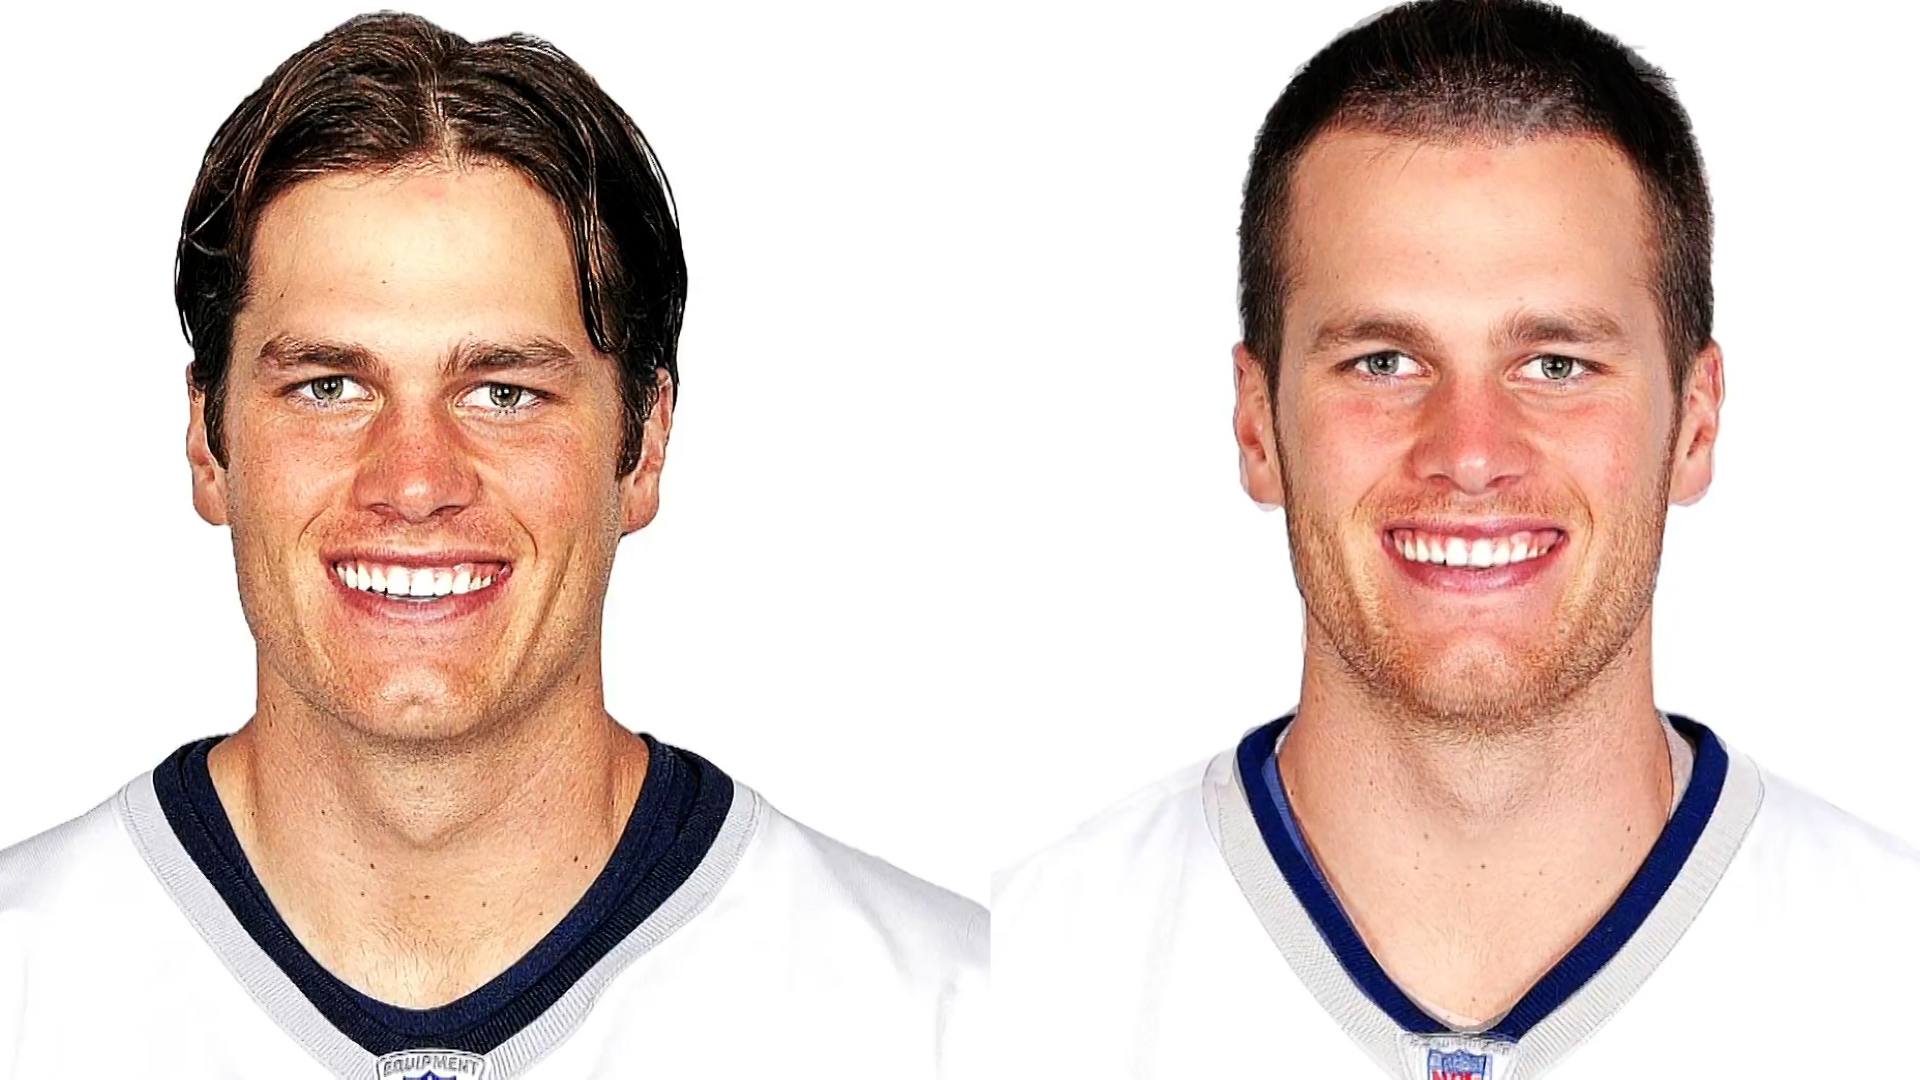 From rookie to veteran, this is the incredible physical evolution of Tom Brady